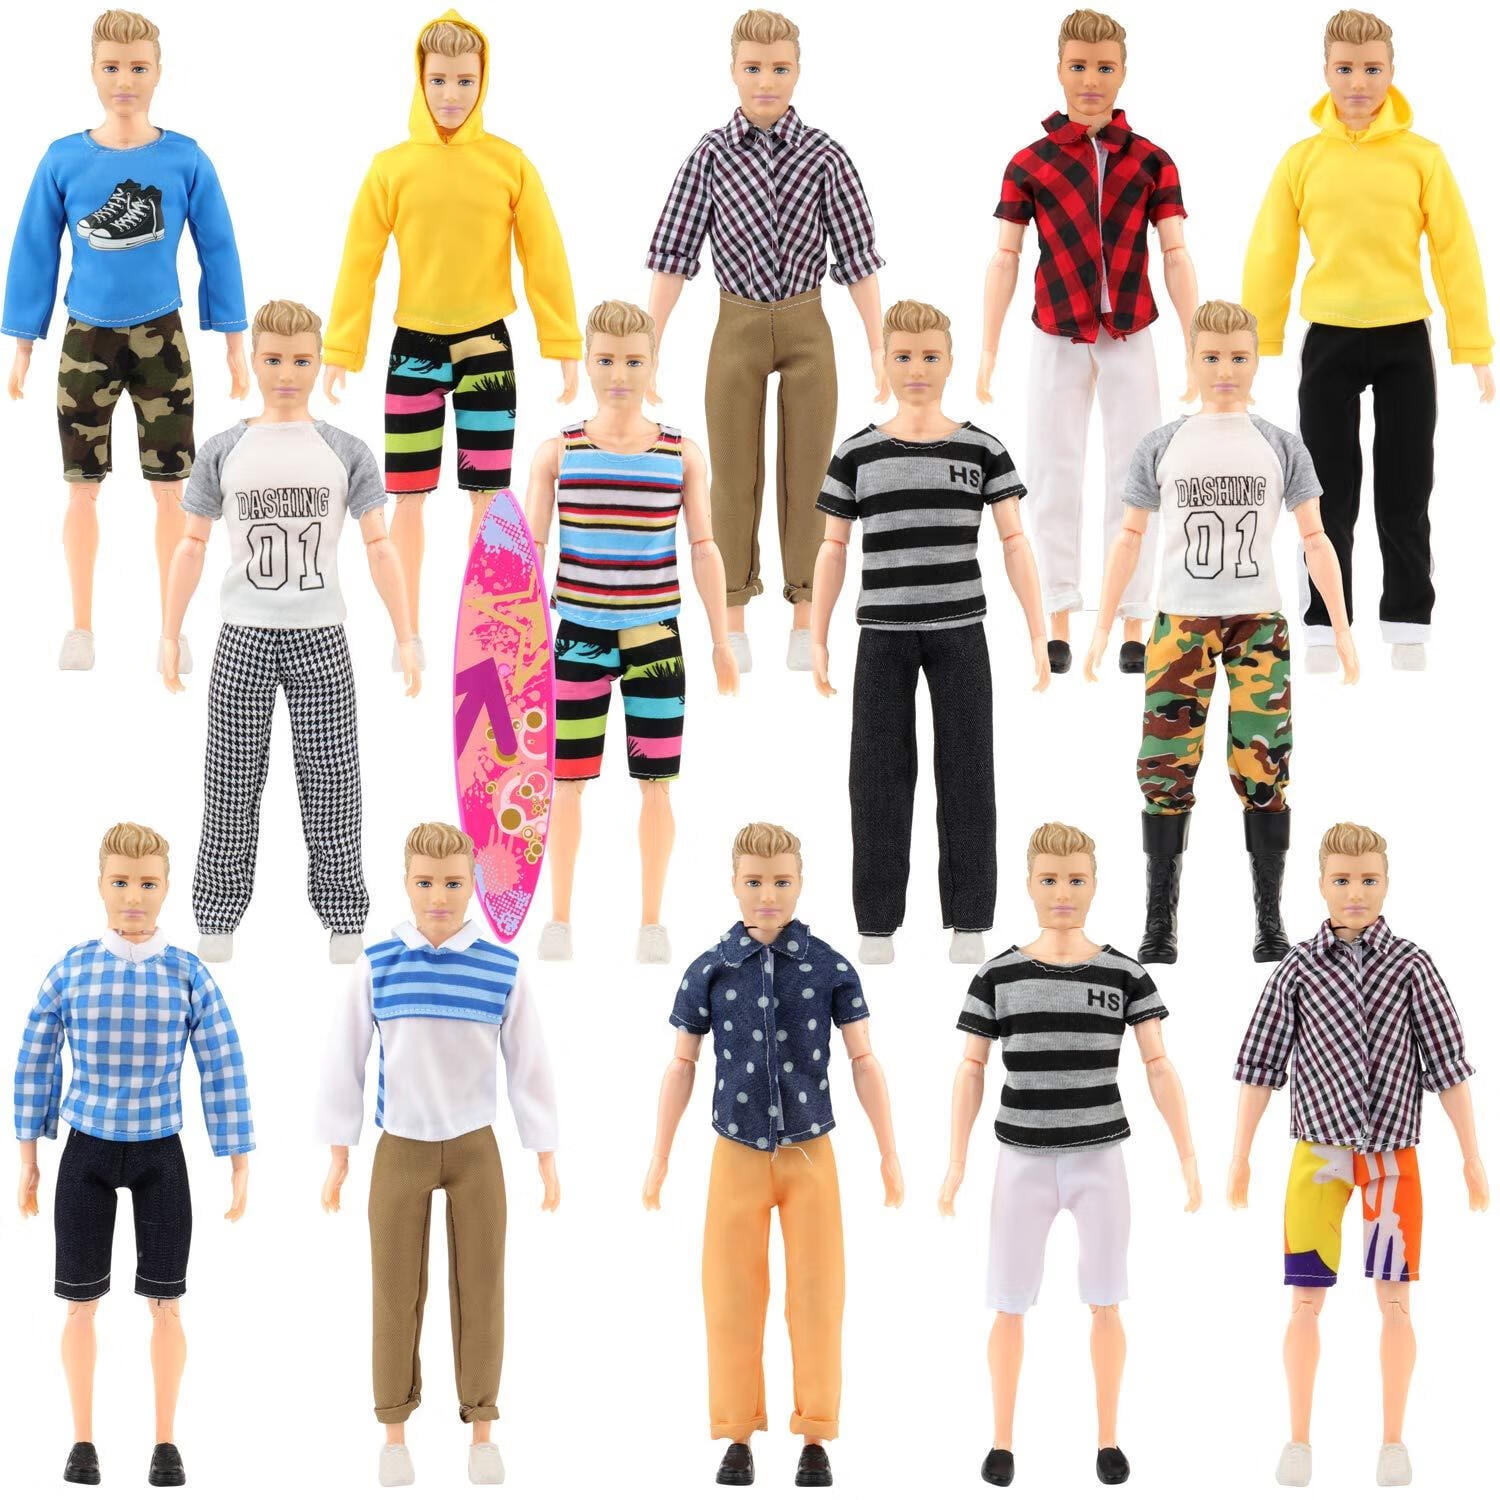 11 PCS Clothes for Ken Doll 12 inch Boy Dolls Including 4 Casual Outfits (  4 Tops and 4 Pants ) 3 Pair of Shoes Ken Clothes Set Christmas Birthday